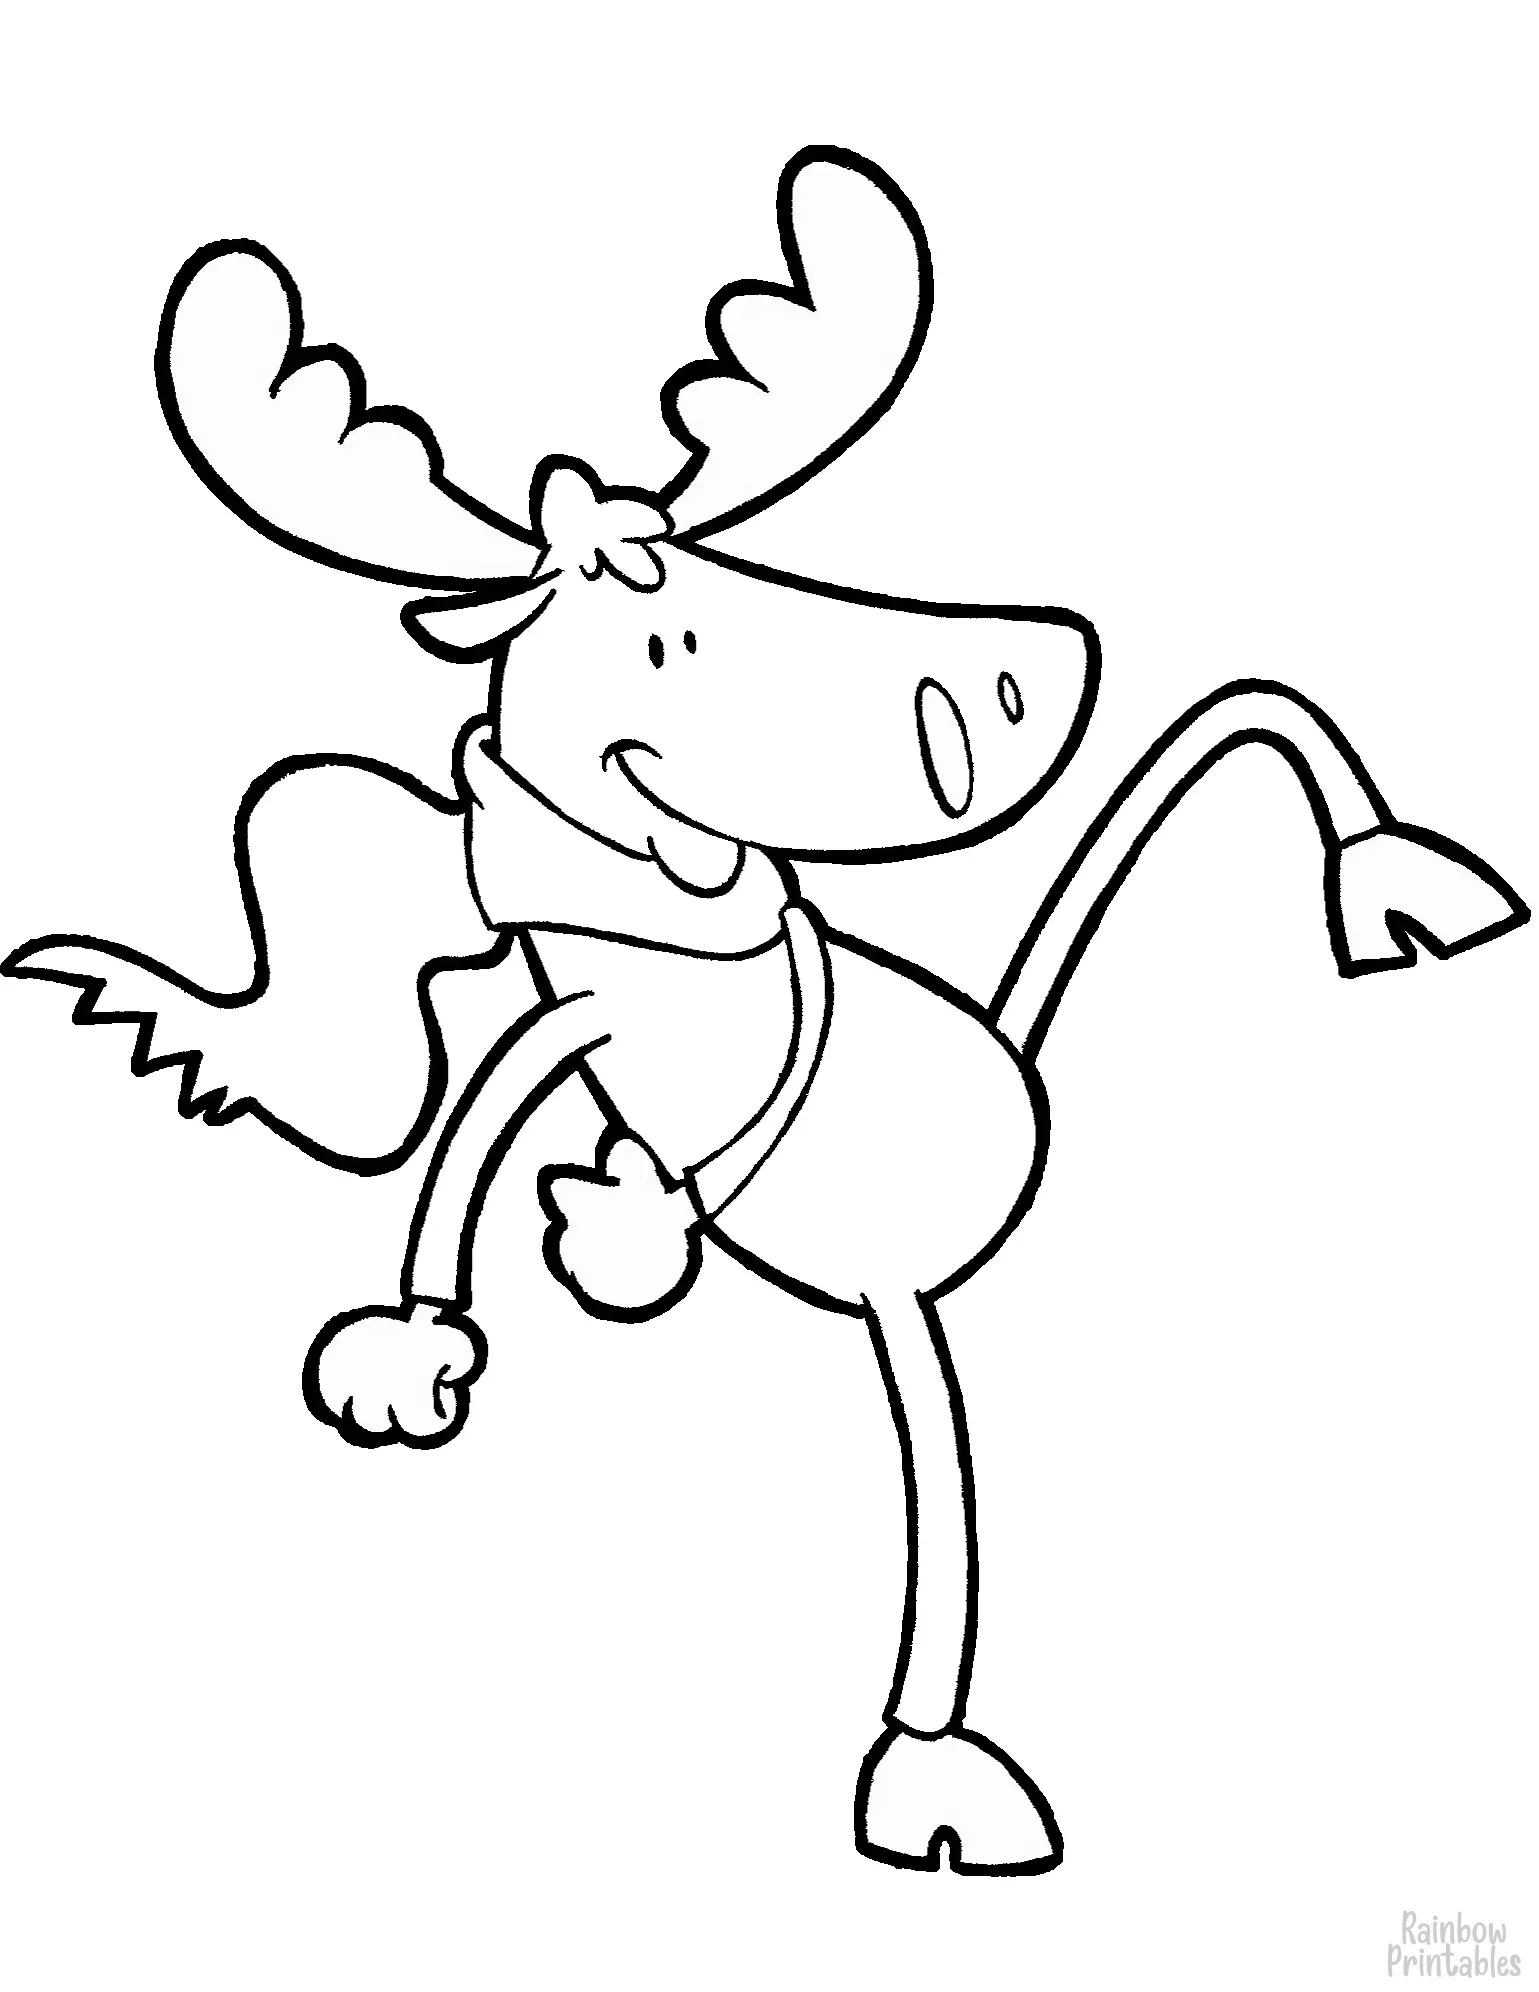 cartoon-moose-coloring-page-Winter Season Drawing Doodle Coloring Book Page Sheets for Kids Activity